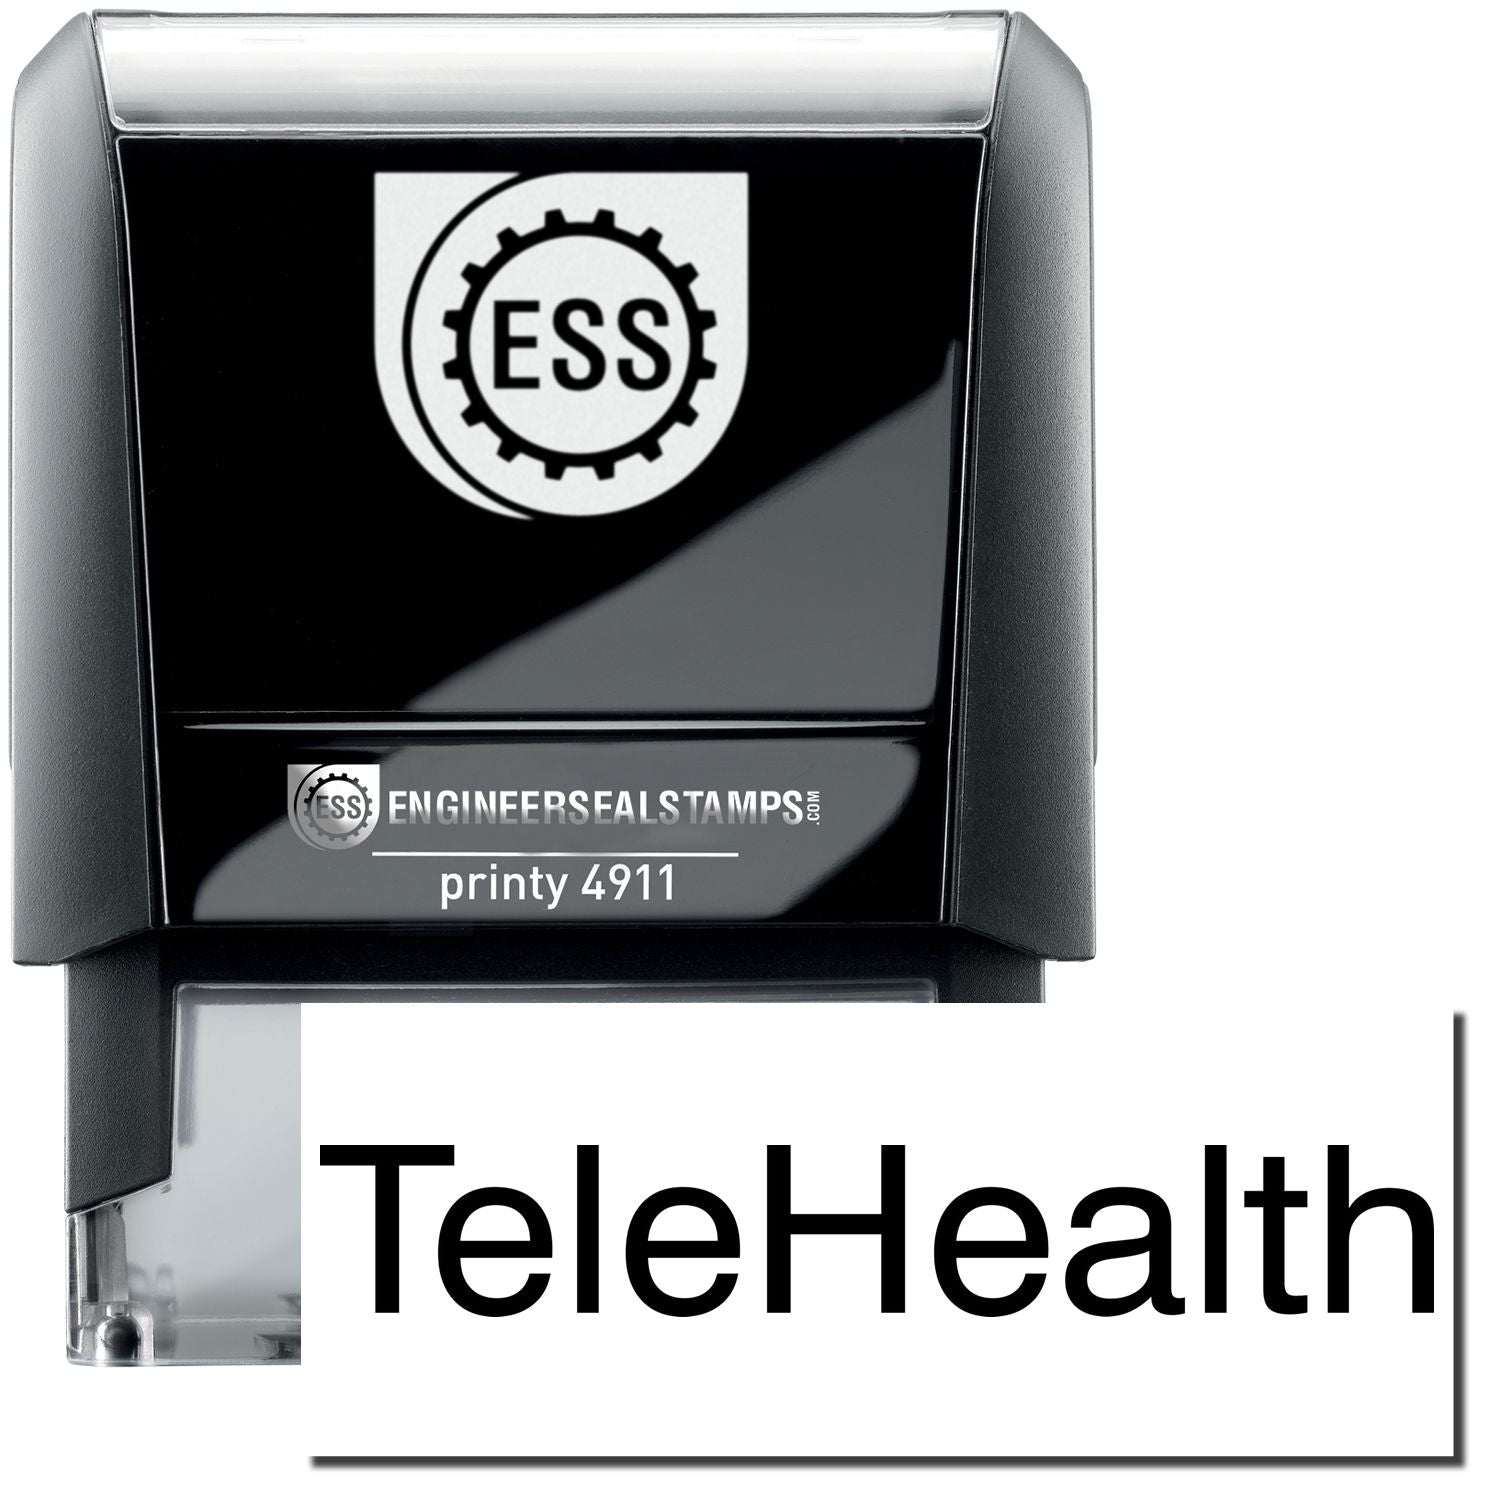 A self-inking stamp with a stamped image showing how the text "TeleHealth" is displayed after stamping.